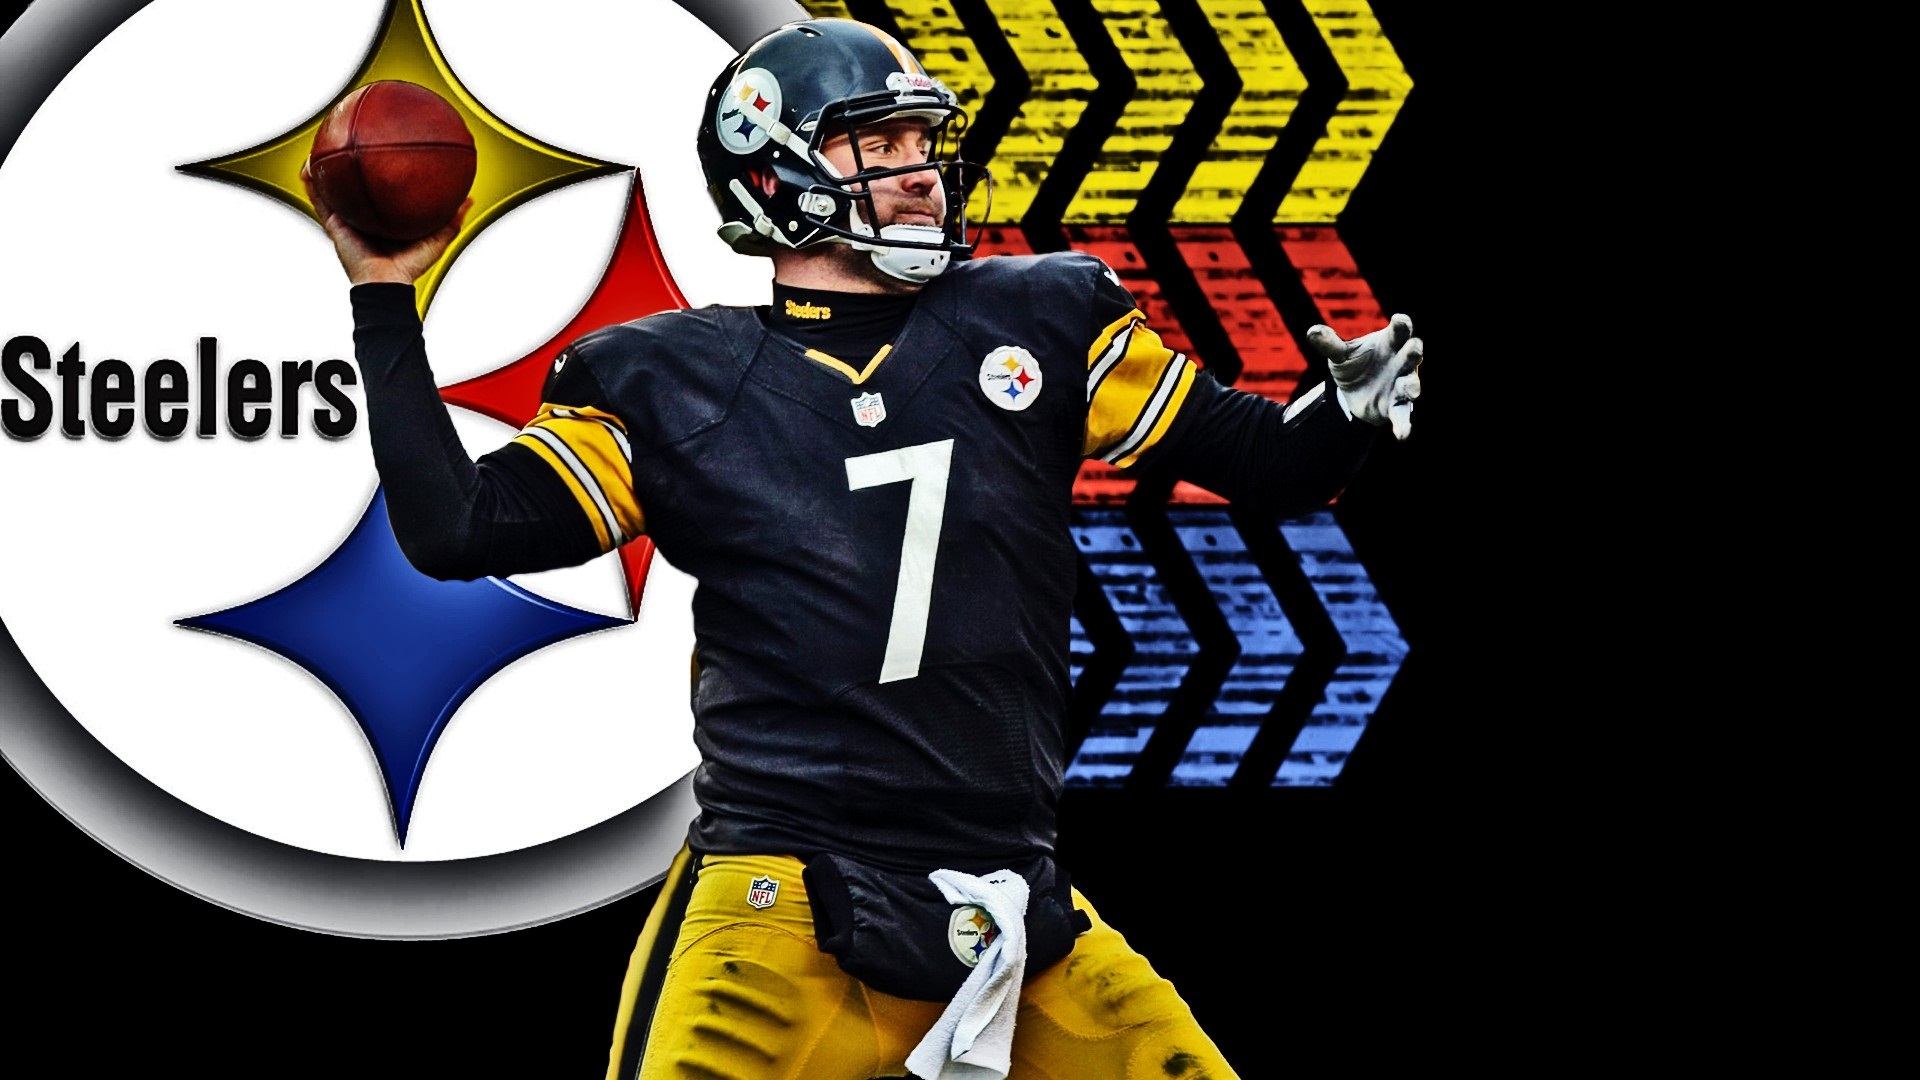 NFL Steelers Mac Backgrounds with resolution 1920x1080 pixel. You can make this wallpaper for your Mac or Windows Desktop Background, iPhone, Android or Tablet and another Smartphone device